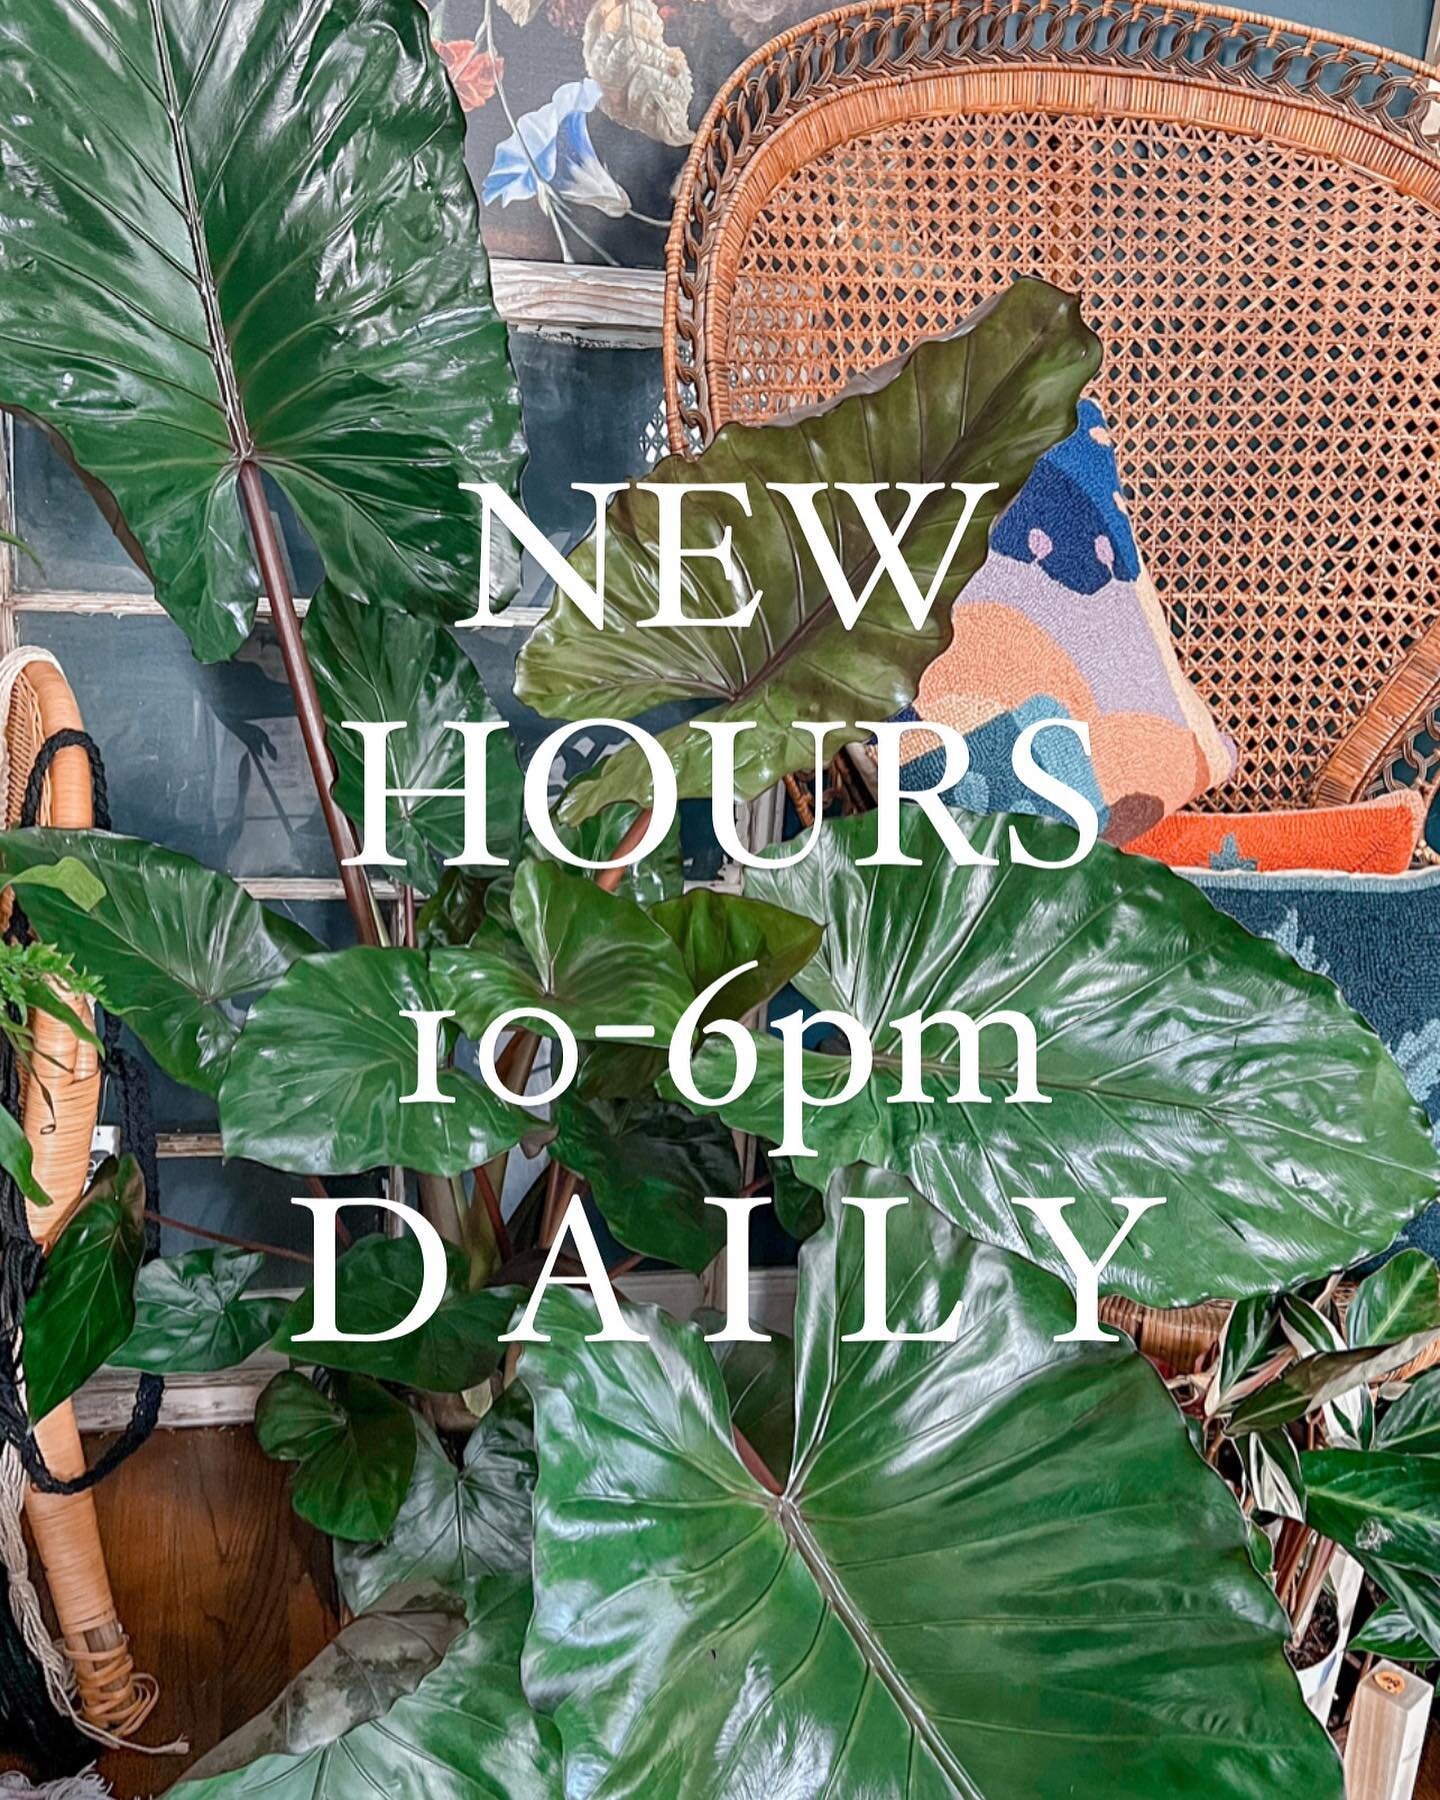 New Hours who dis&hellip;.
D A L L A S&hellip;.you have shown us so much love since day one. And we think it&rsquo;s only fair to give you a little extra time to take in all the 

P L A N T 
J O Y

So don&rsquo;t just spend the afternoons with us. Co